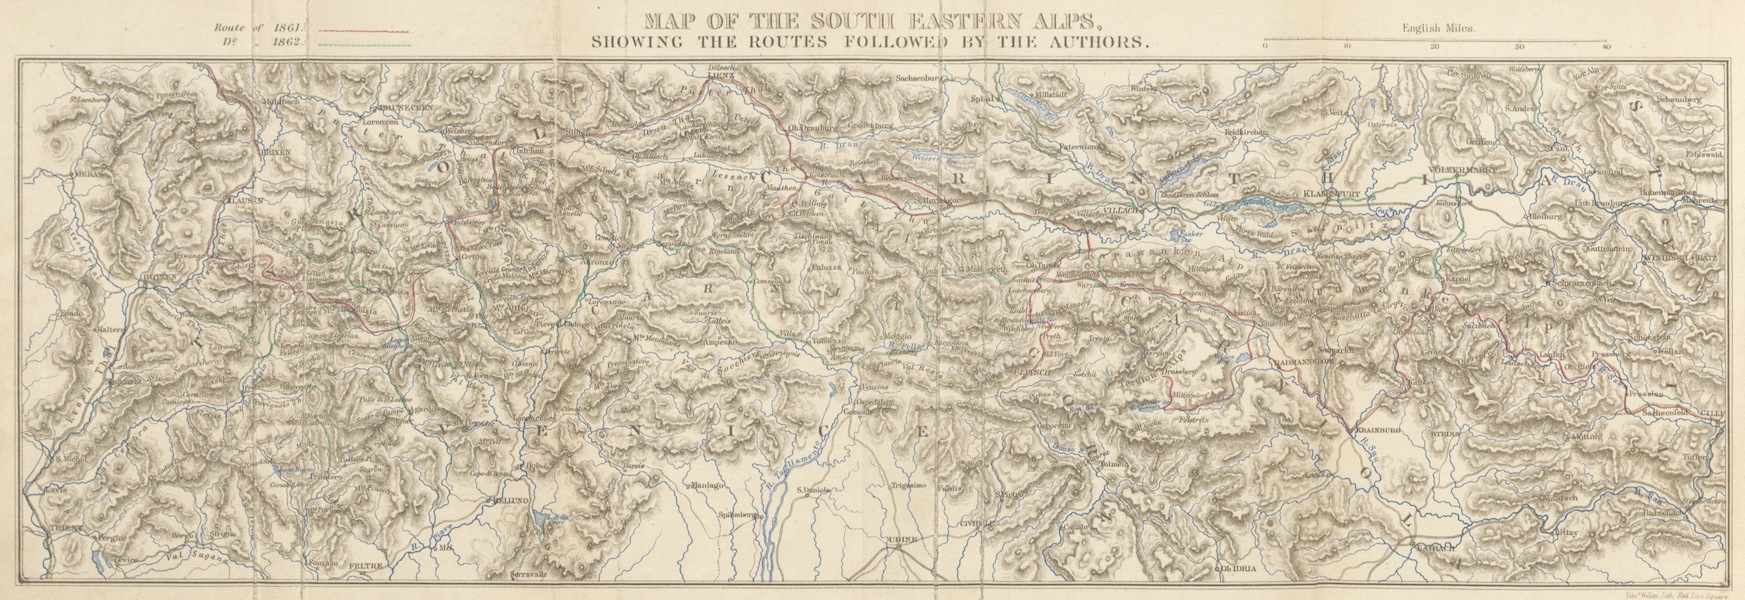 Map of the South Eastern Alps Showing the Routes Followed by the Authors